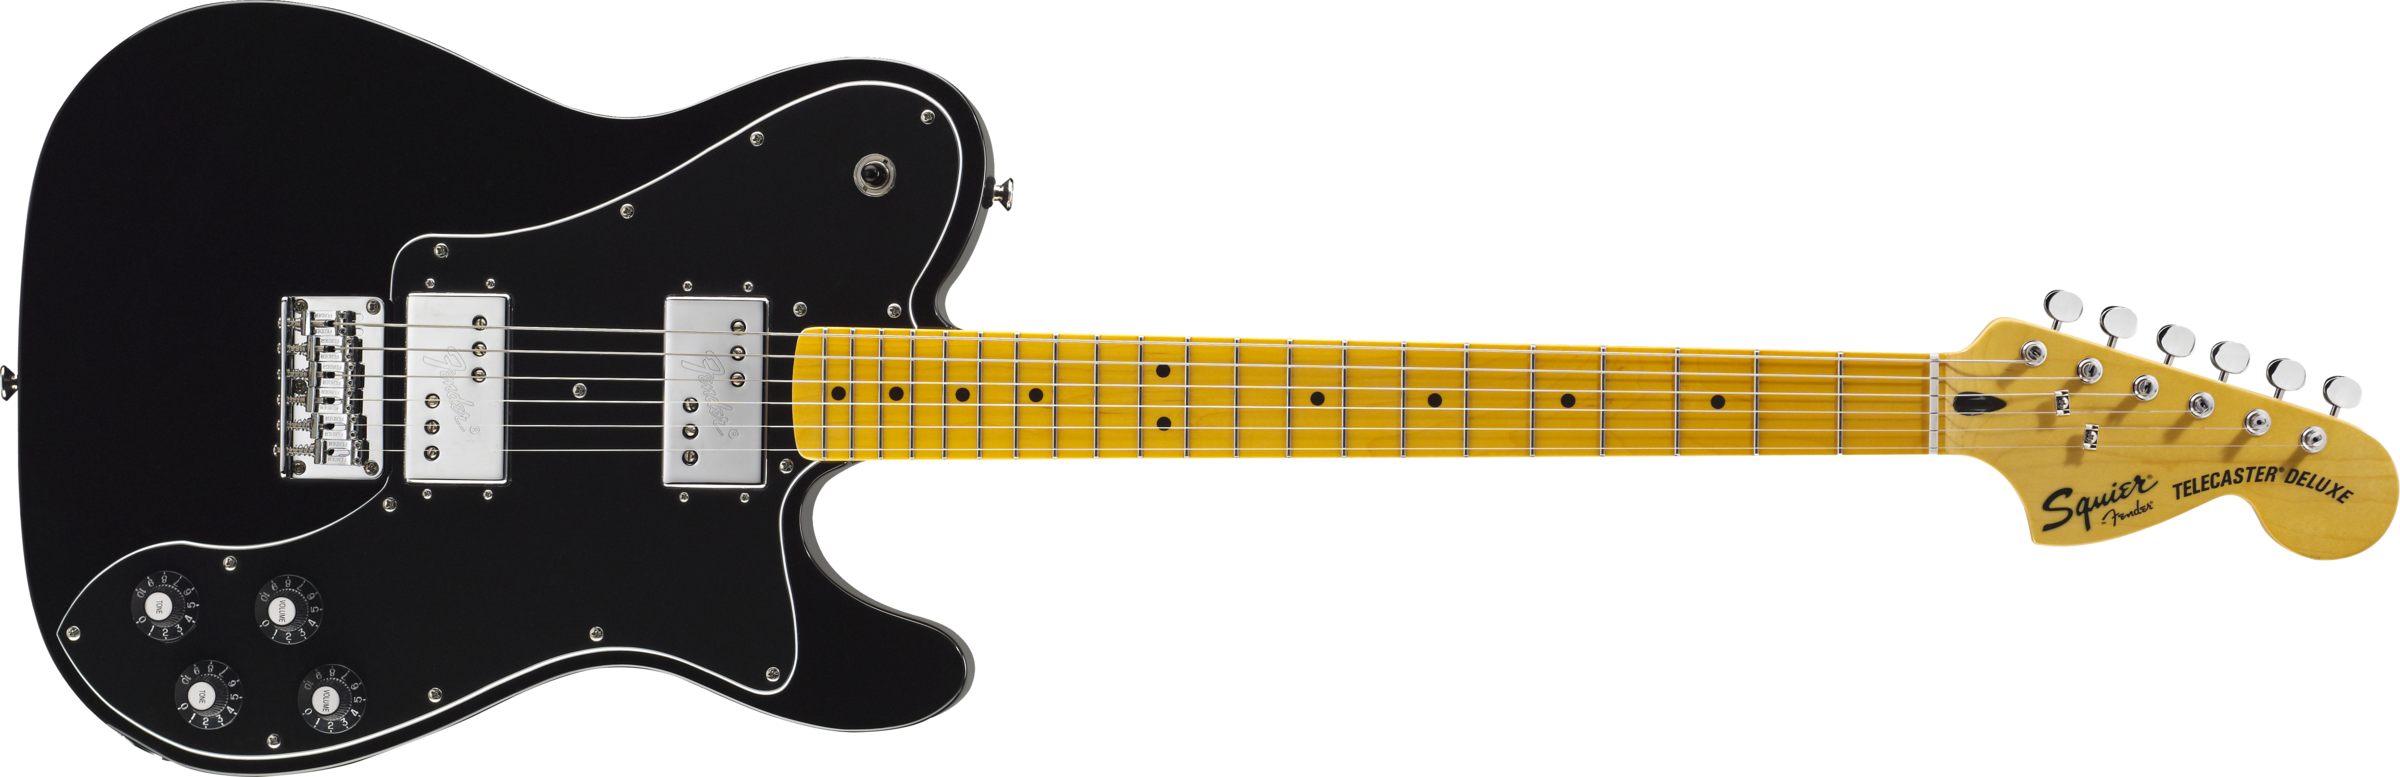 squier-vintage-modified-telecaster-deluxe-155865.png